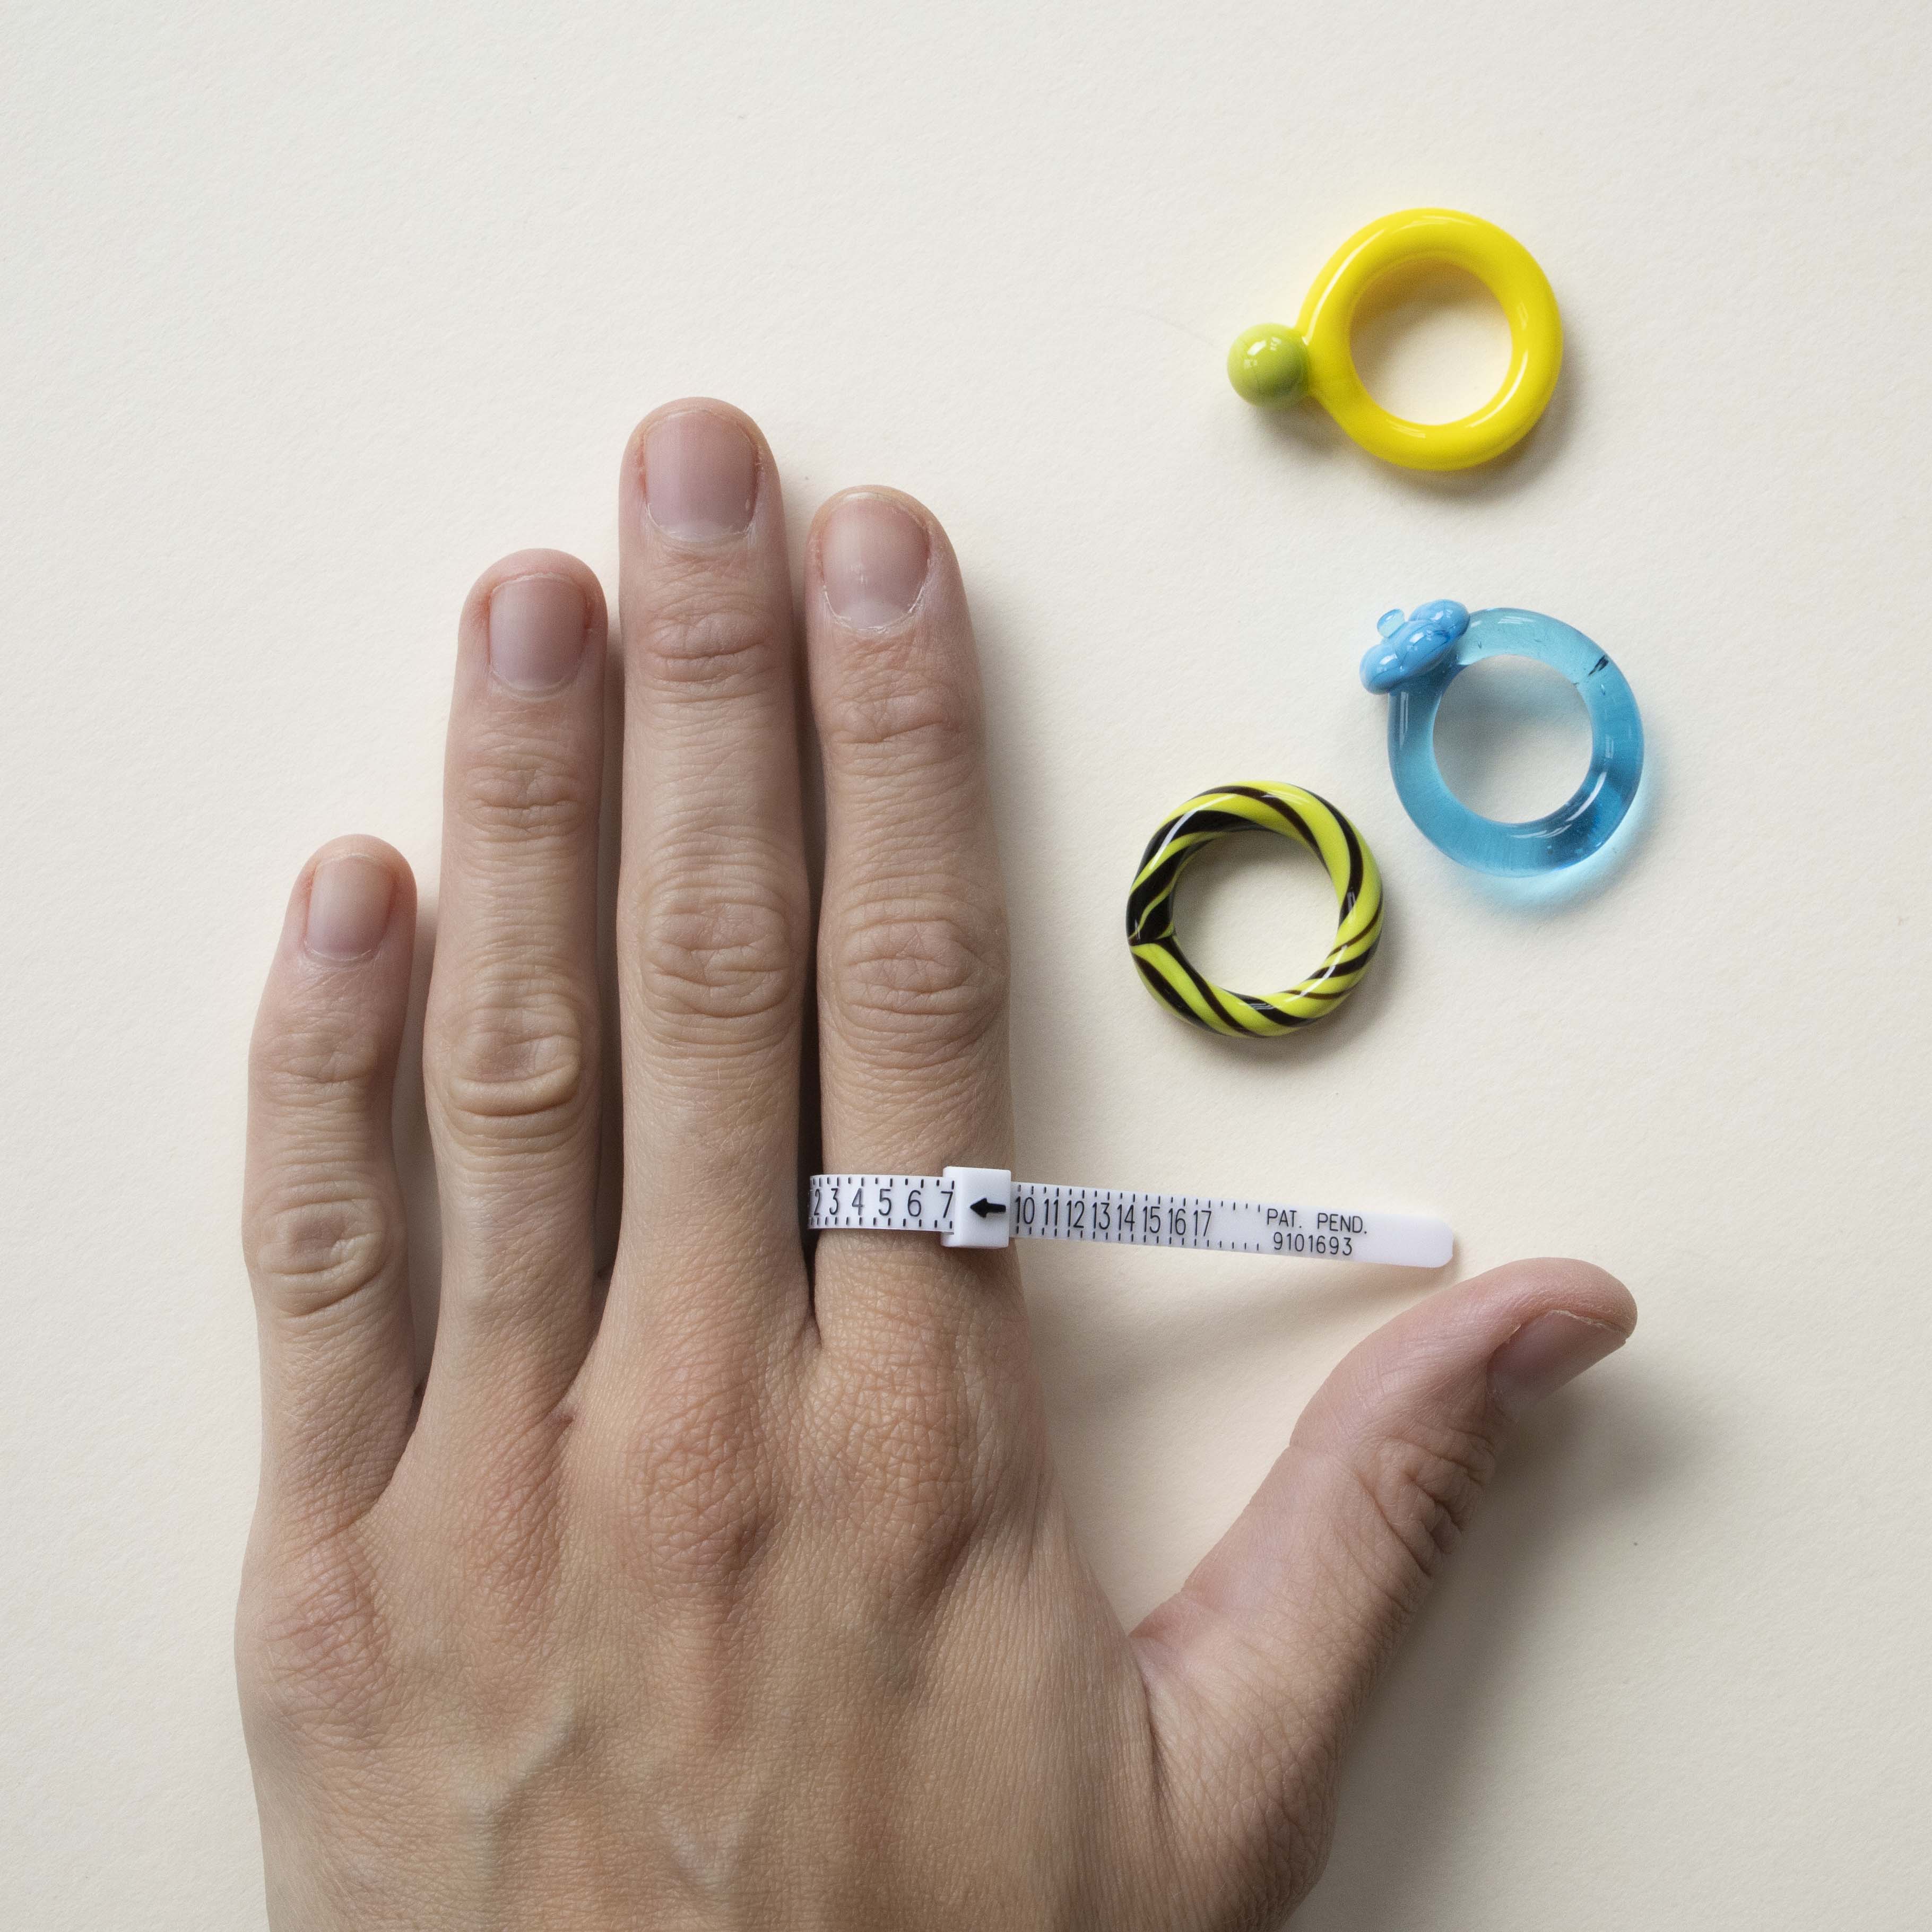 How To Measure Ring Size, Ring Sizes For Men